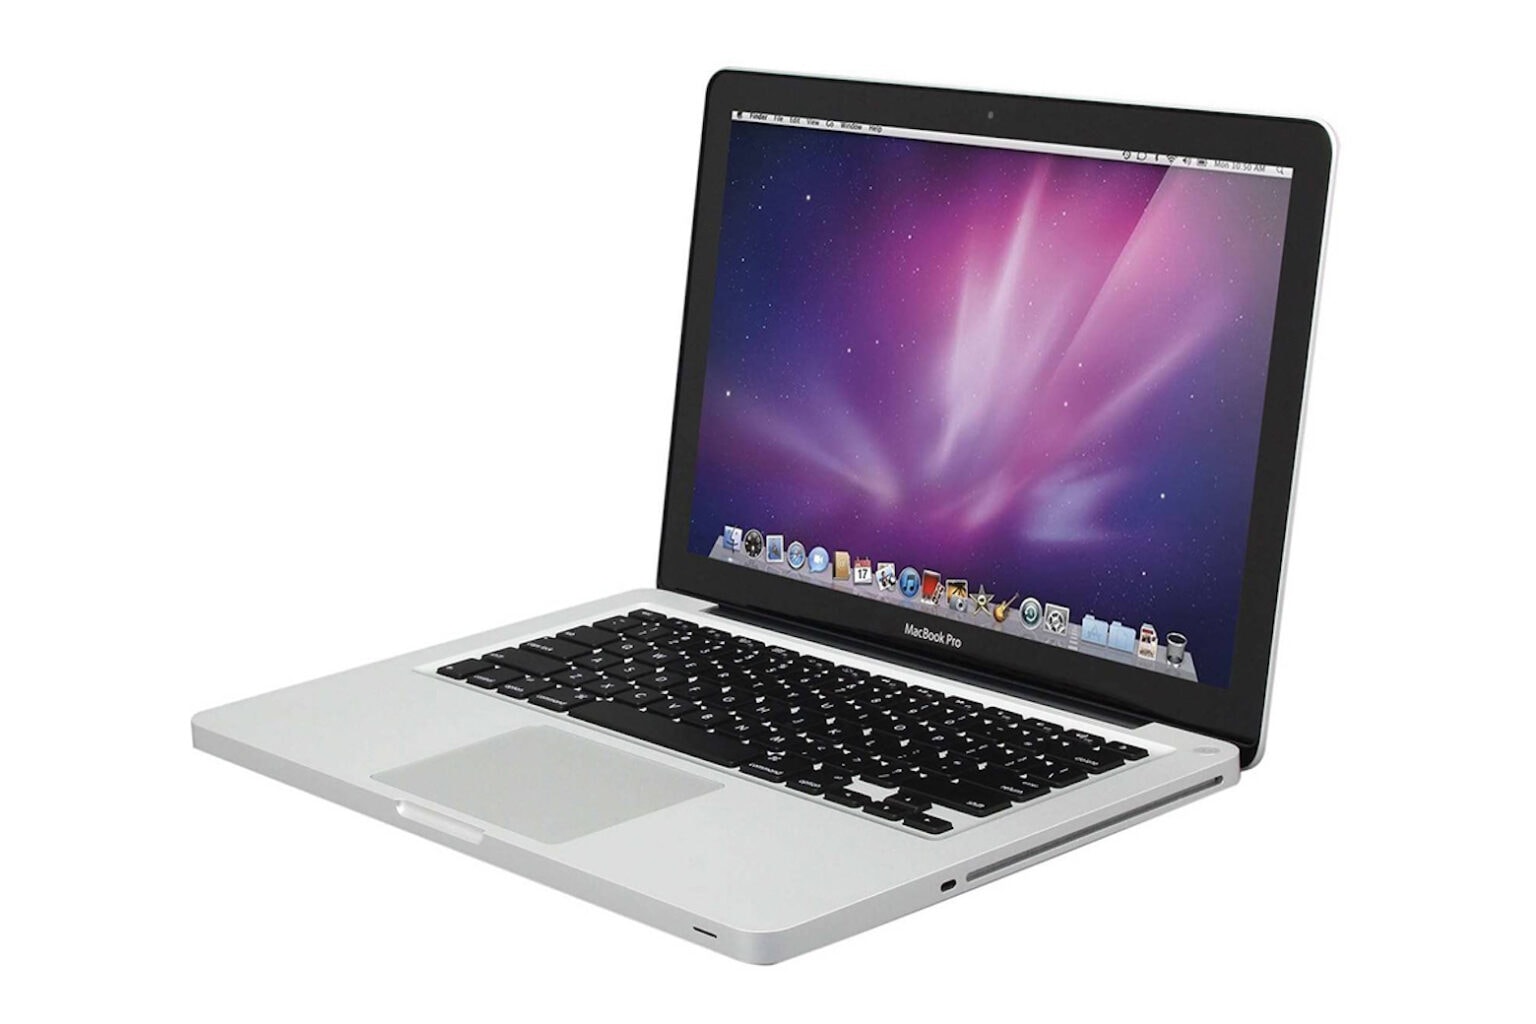 Treat yourself to a refurbished MacBook Pro for $254.99.